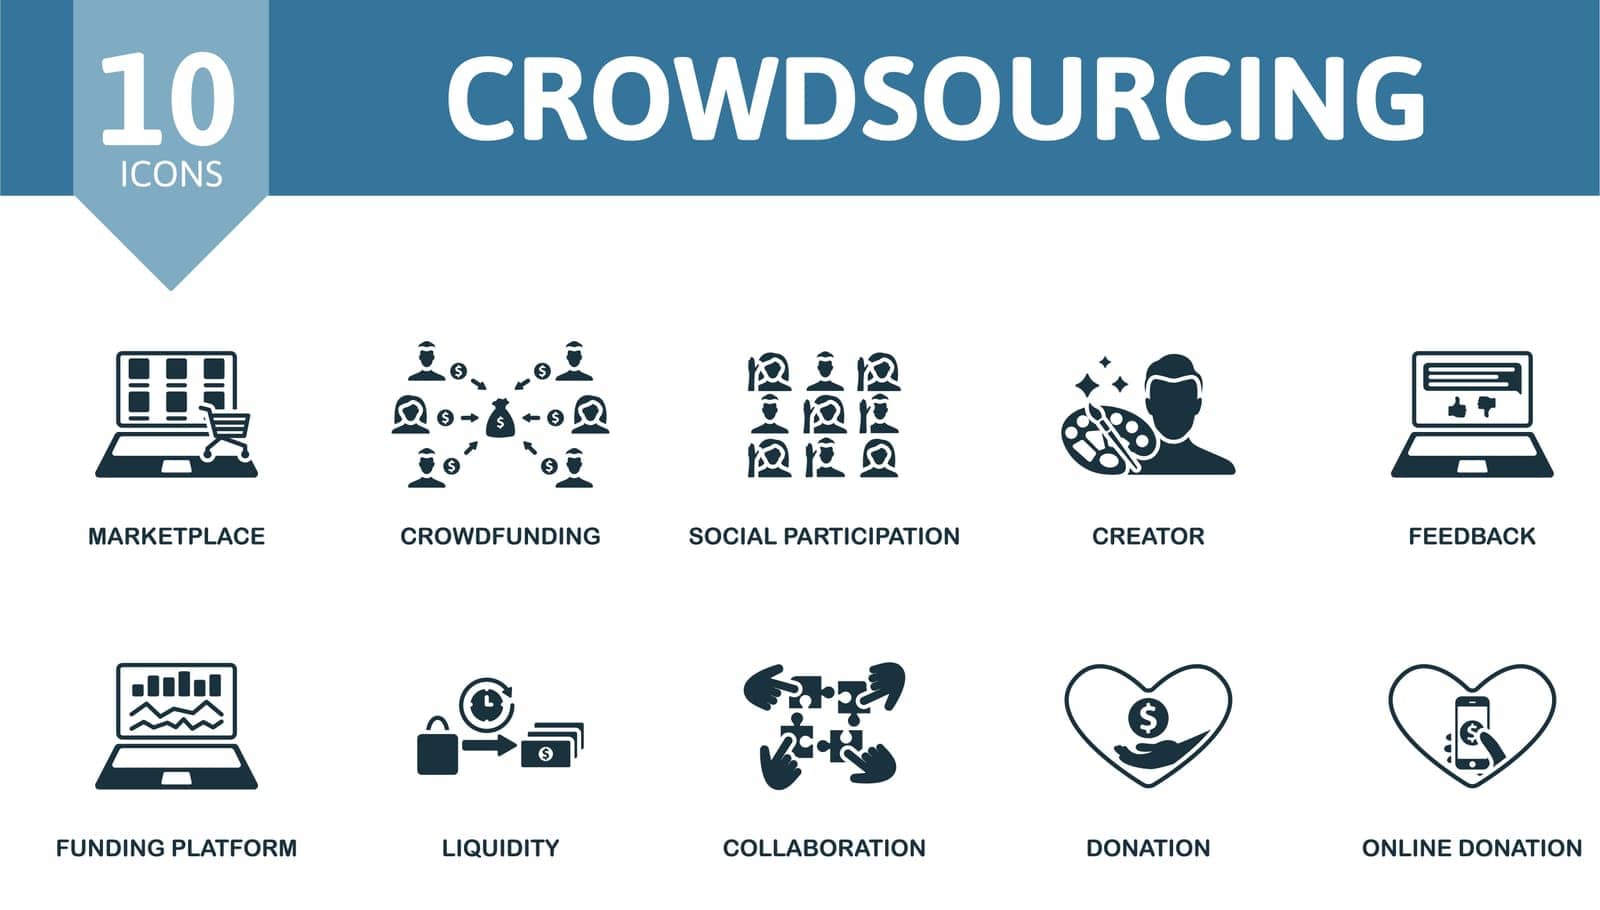 Crowdsourcing set. Creative icons: marketplace, crowdfunding, social participation, creator, feedback, funding platform, liquidity, collaboration, donation, online donation. by simakovavector